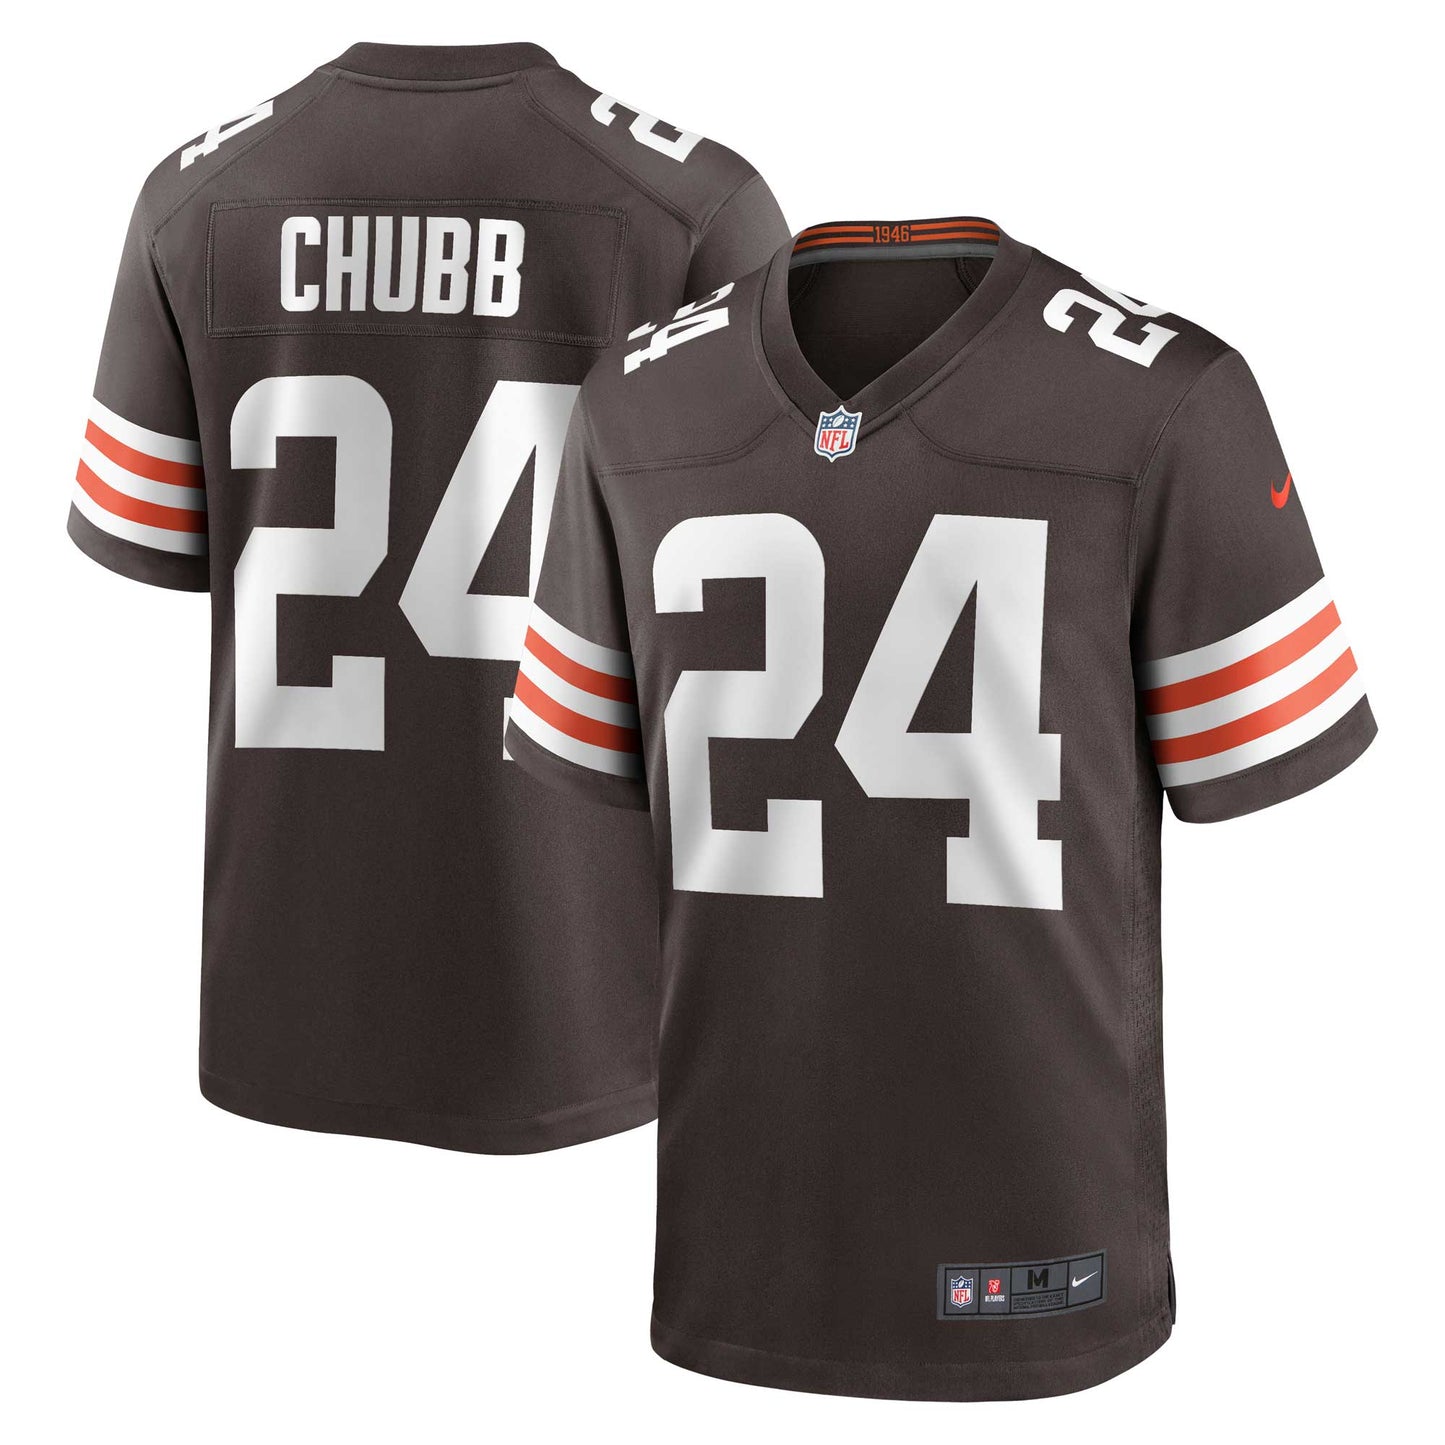 Nick Chubb Cleveland Browns Nike Game Jersey - Brown